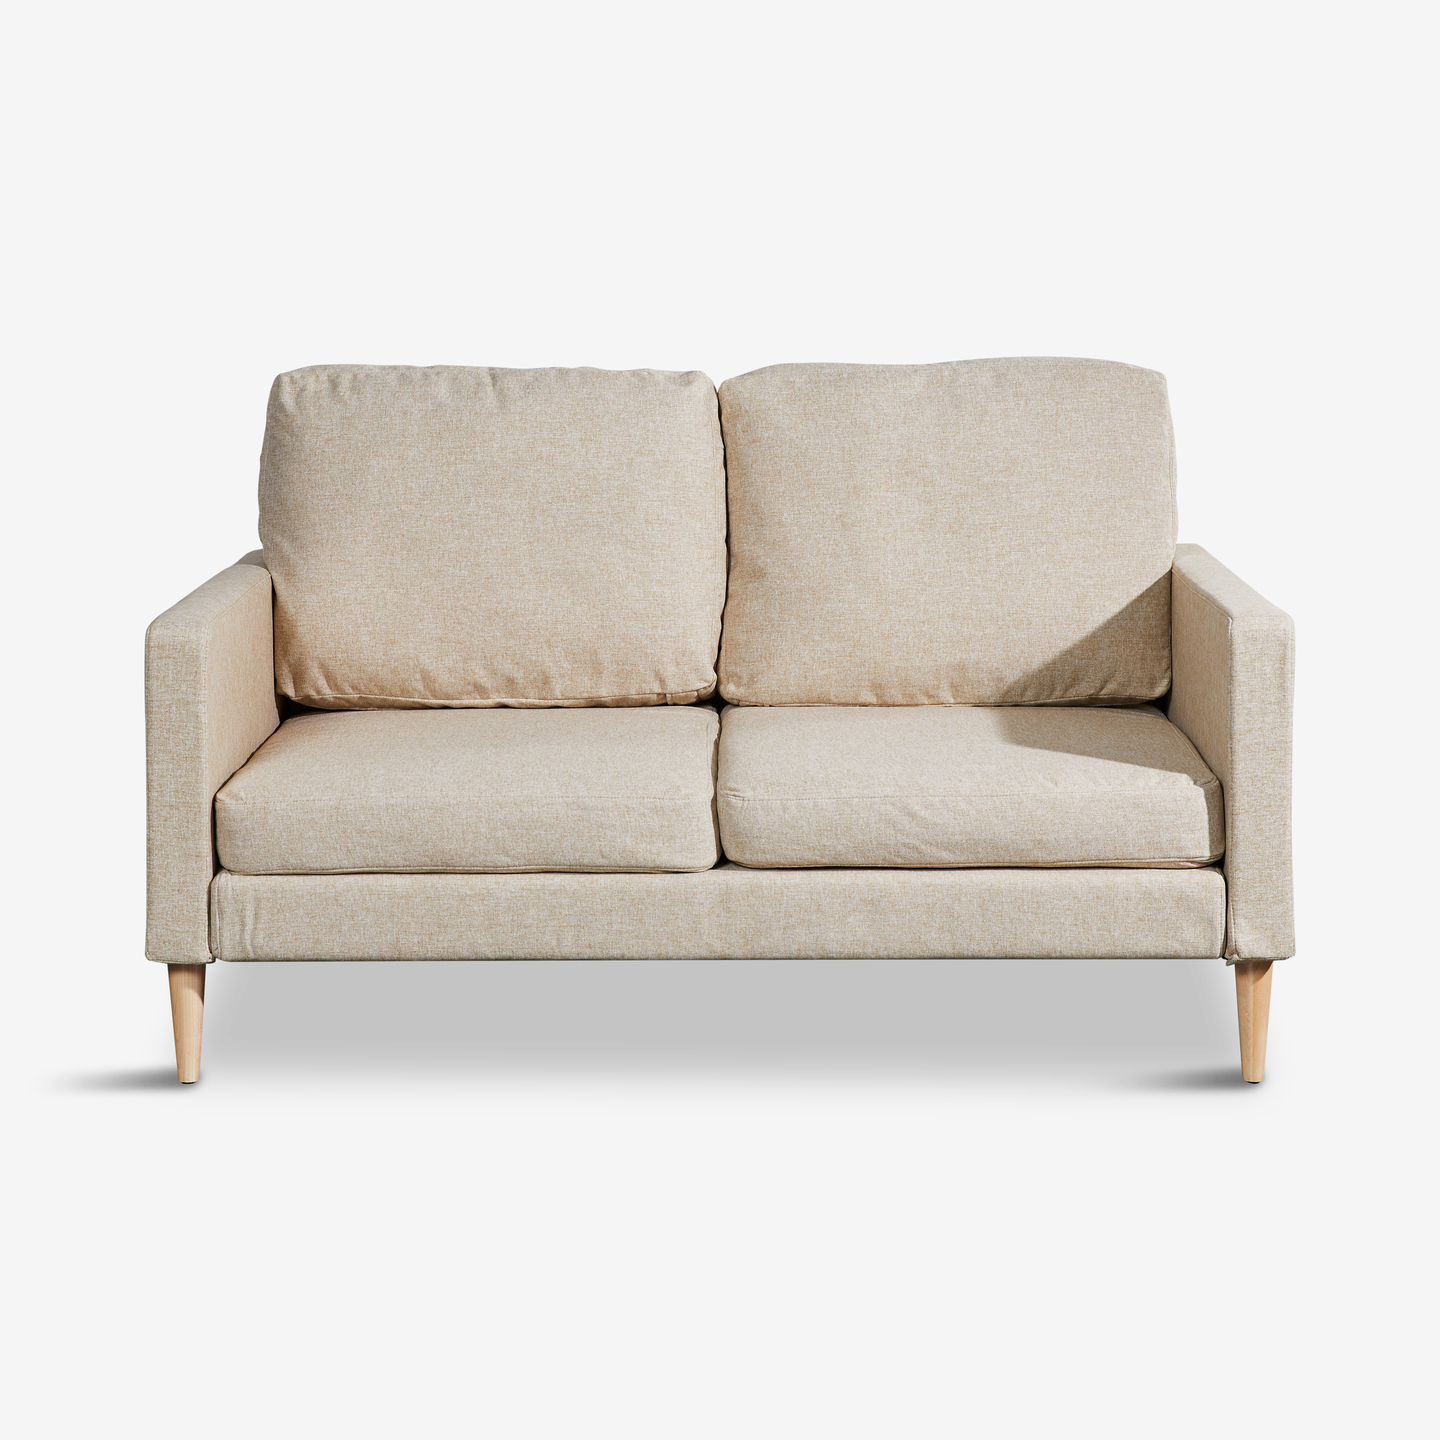 423_Campaign-Loveseat-Textured-Oat_Flat-Front 2020